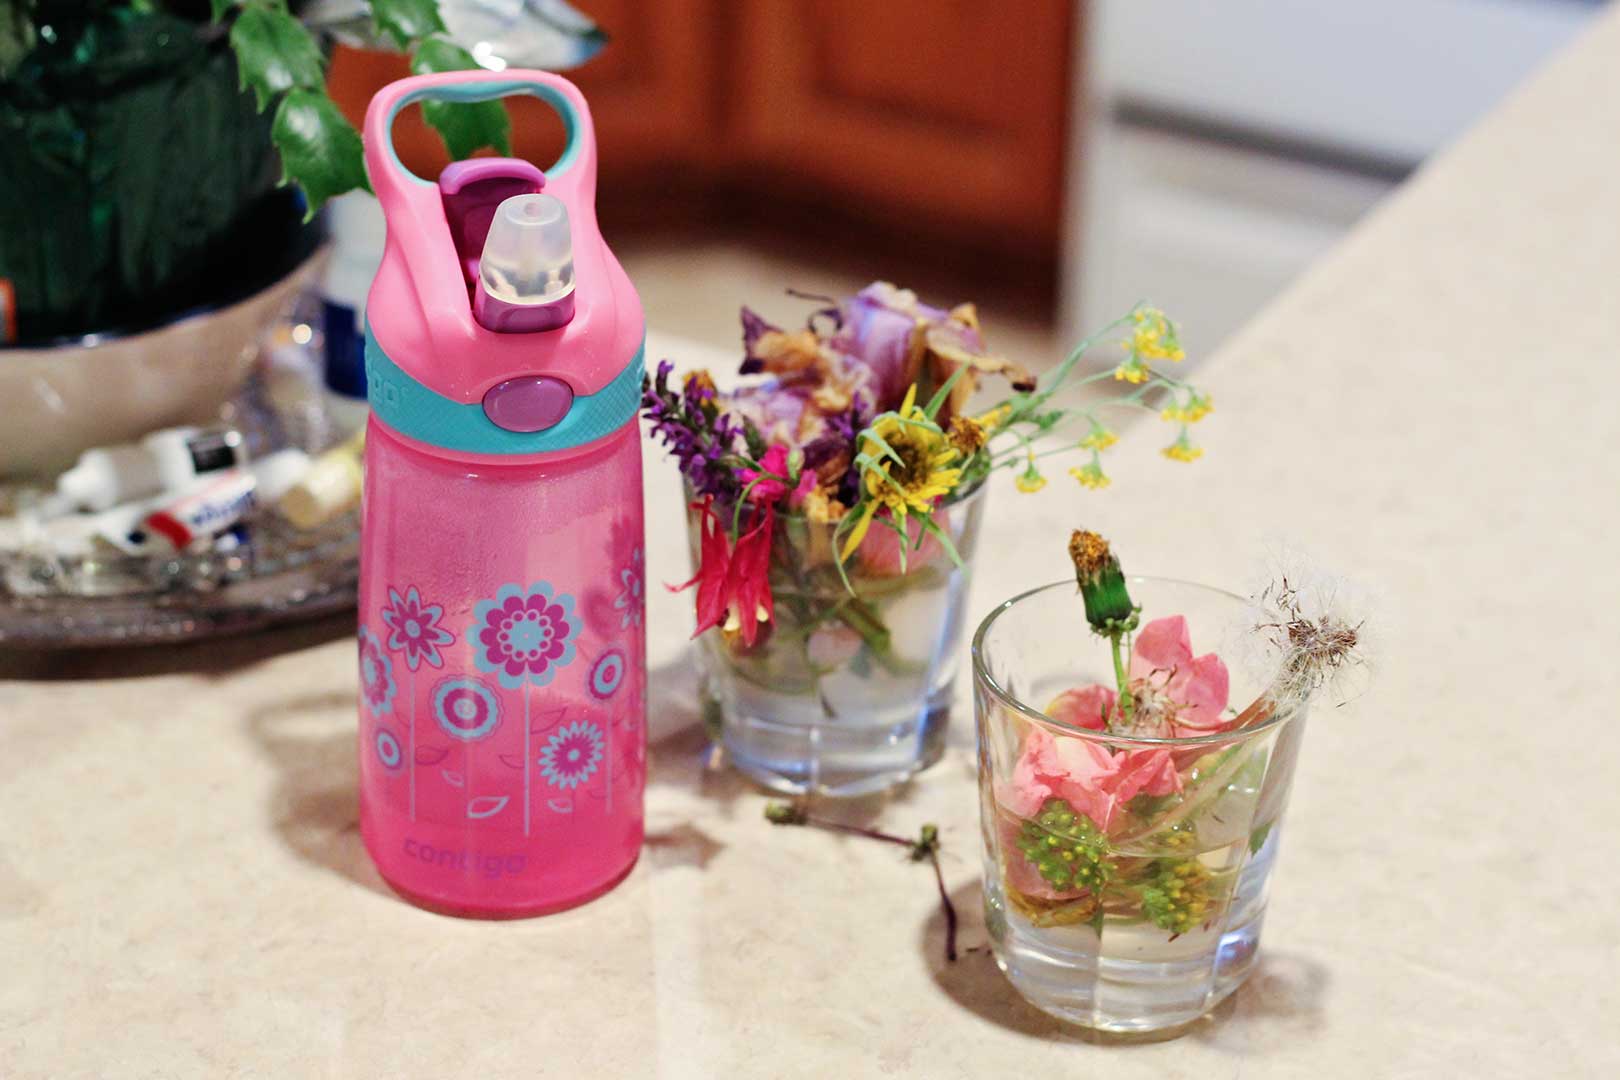 A child's pink water bottle and glass jars of flowers sitting on a countertop.